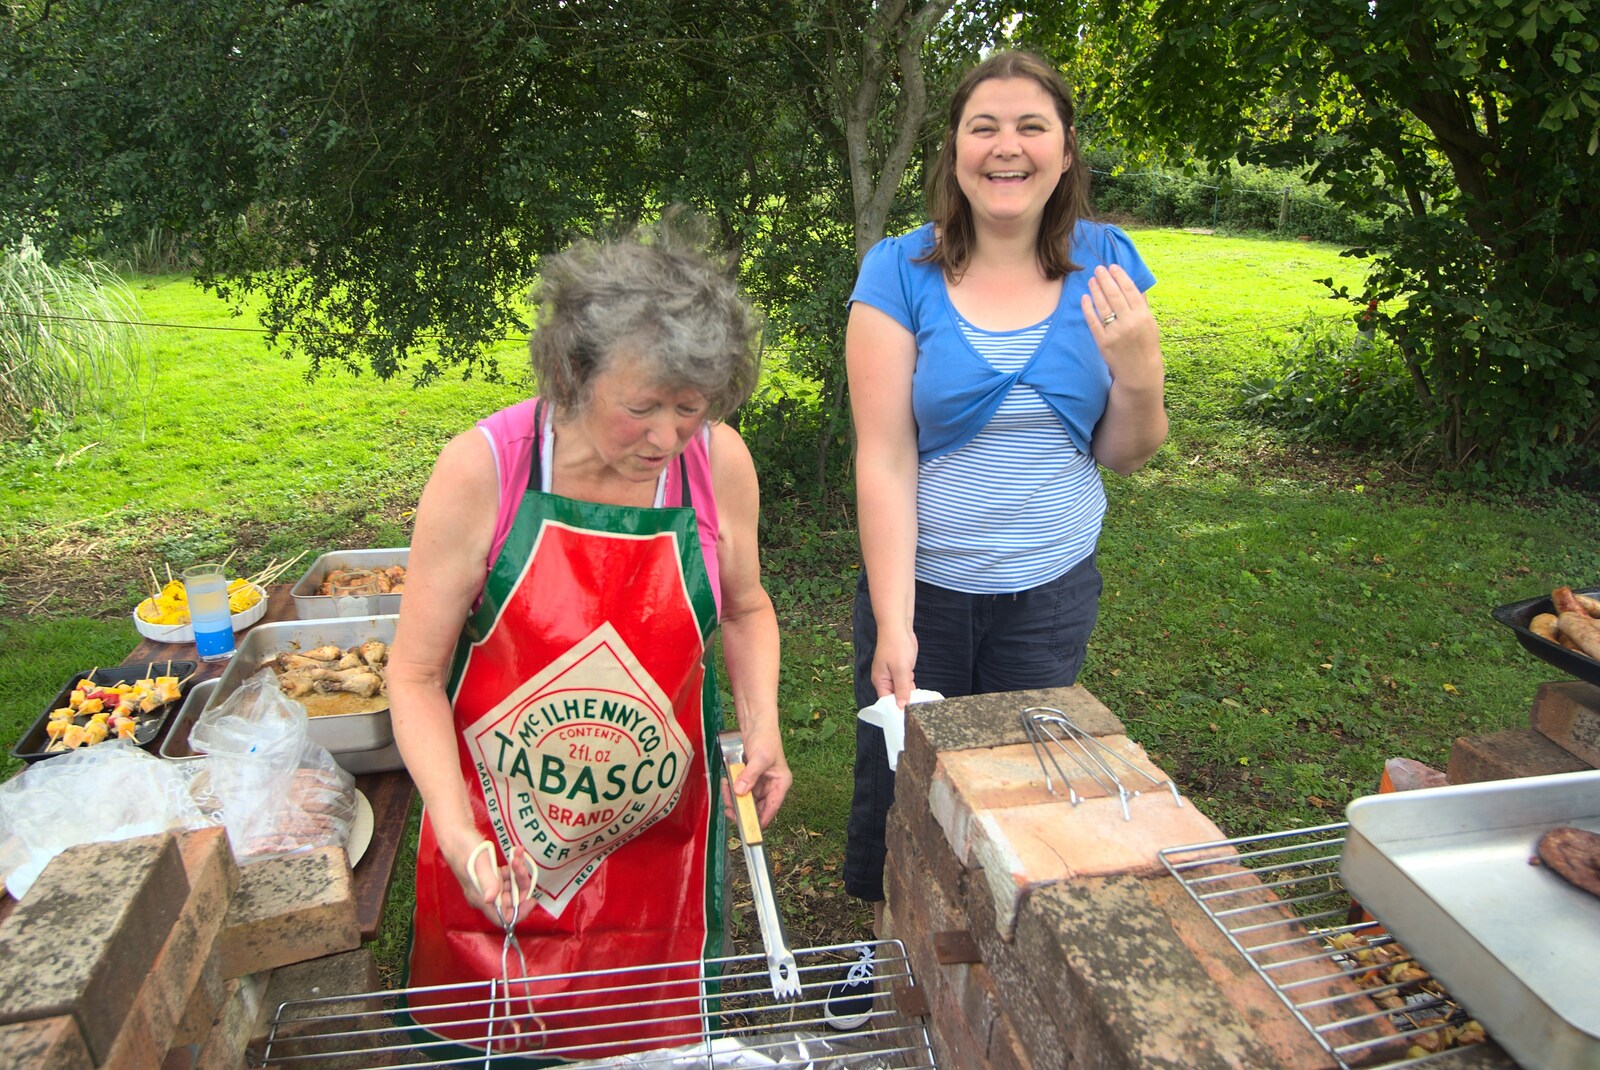 Sylvia and Claire are on barbeque duty from Barbeque at the Swan Inn, Brome, Suffolk - 5th August 2011